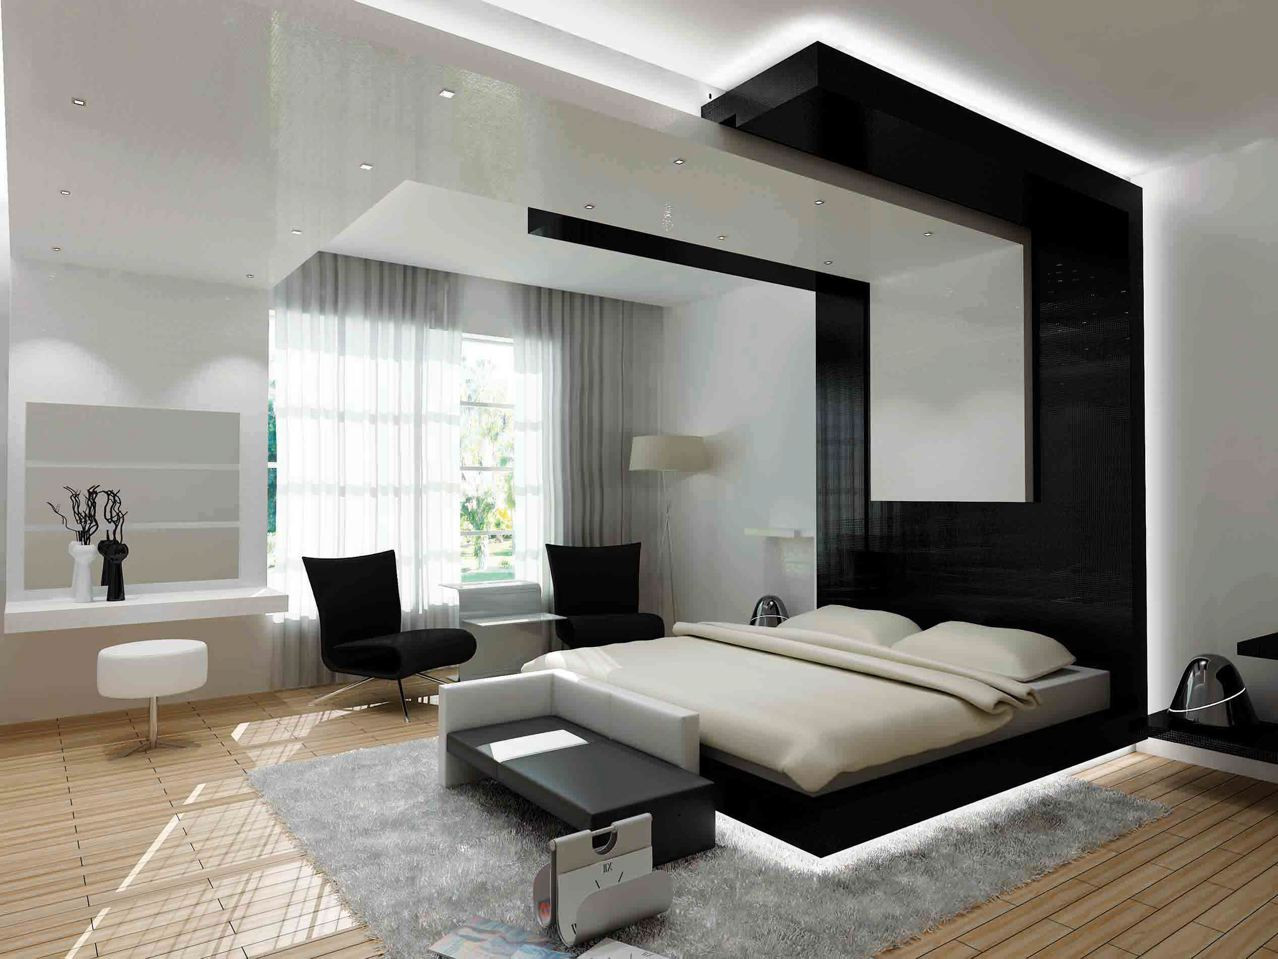 Modern Bedroom Designs
 30 Contemporary Bedroom Design For Your Home – The WoW Style